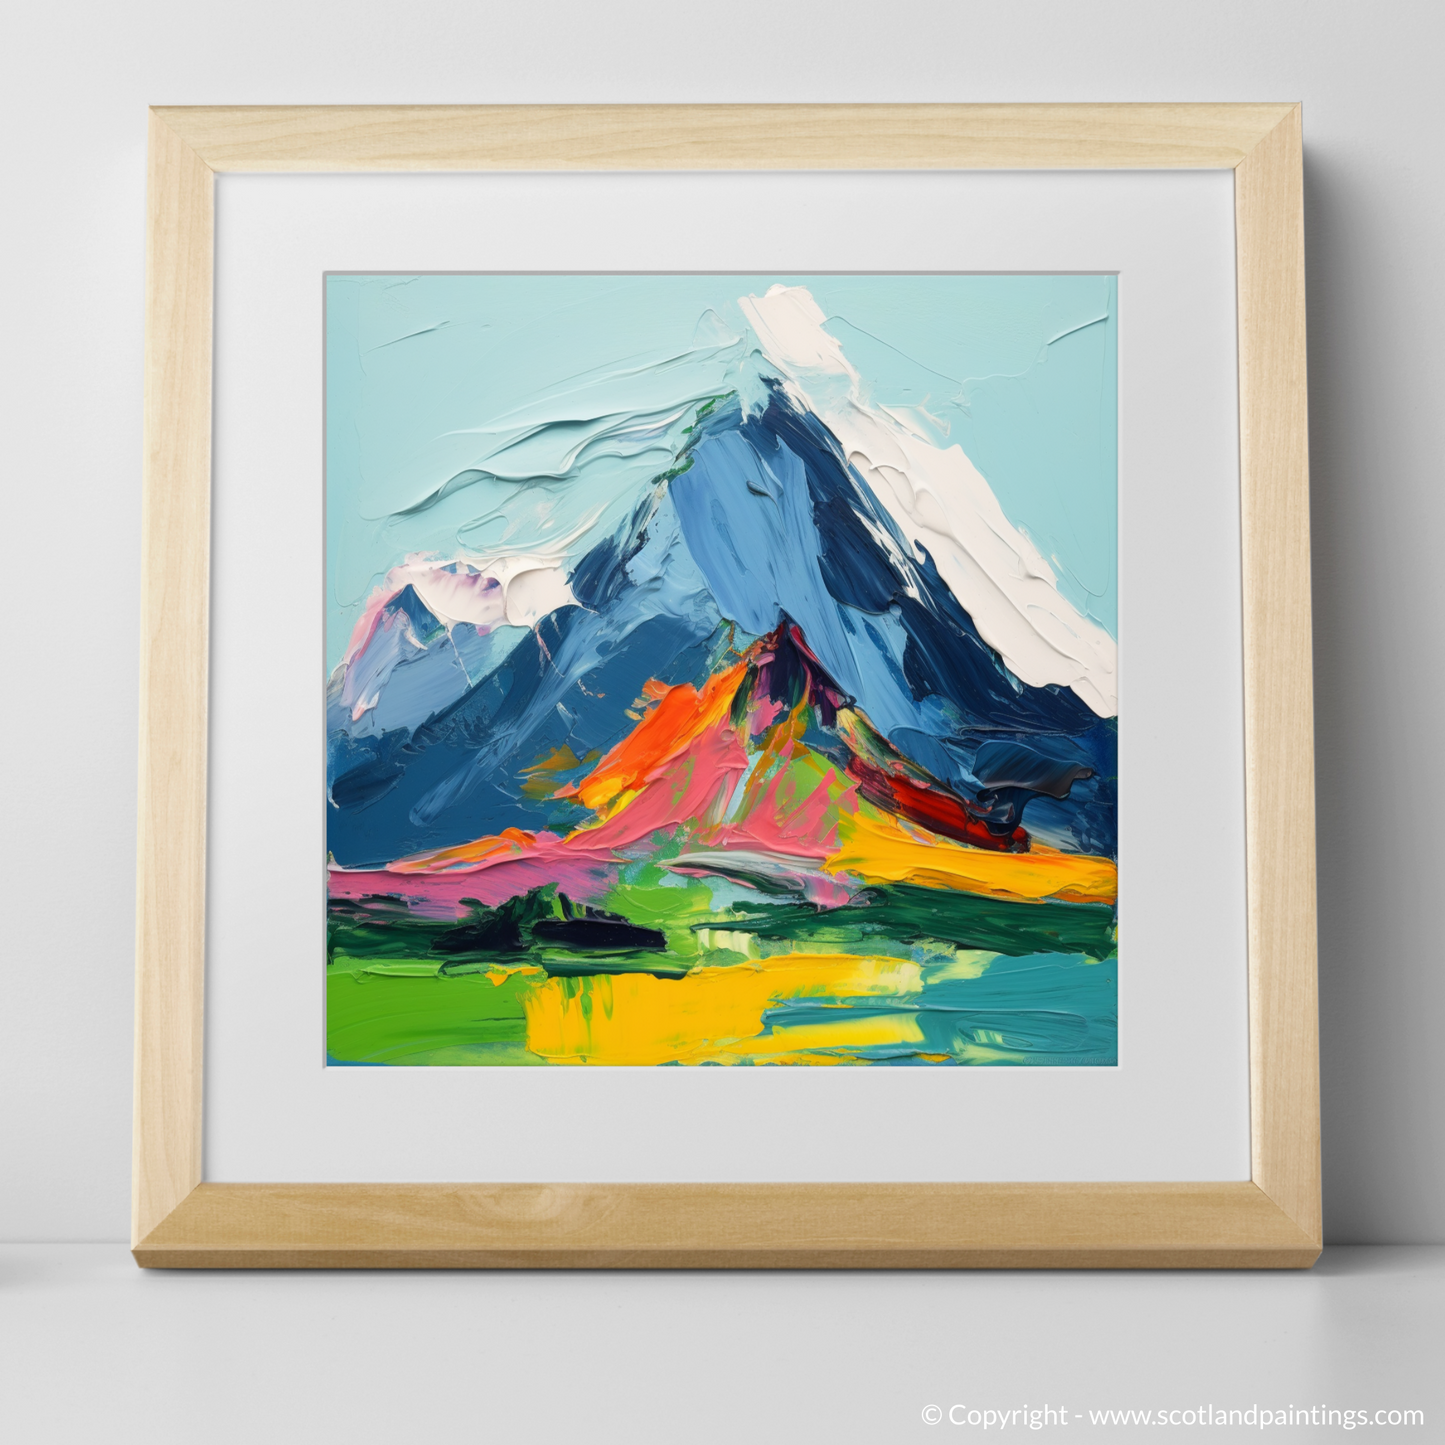 Highland Hues: An Abstract Tribute to Sgurr na Ciche